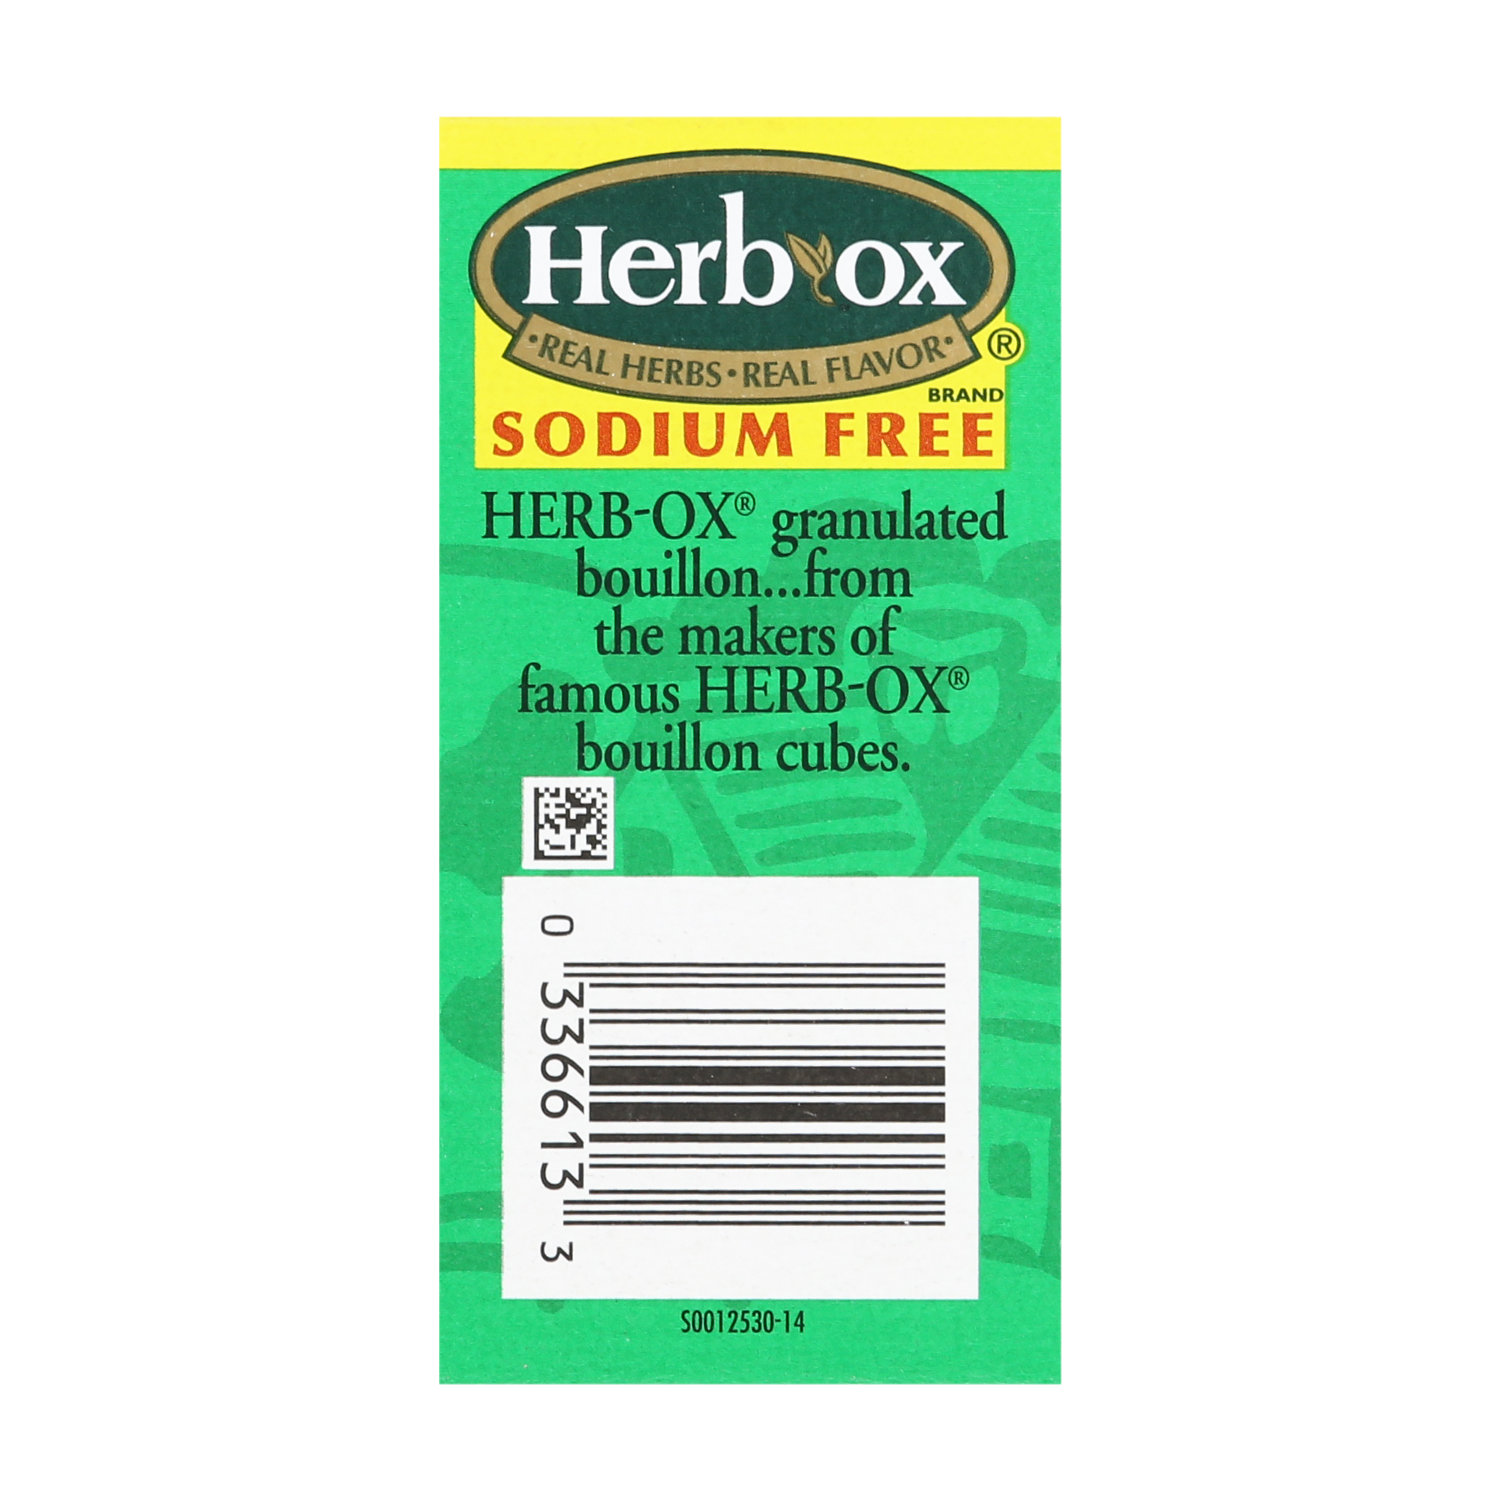 Herb-Ox Bouillon, Sodium Free, Chicken Flavor, Granulated, 8 Pack